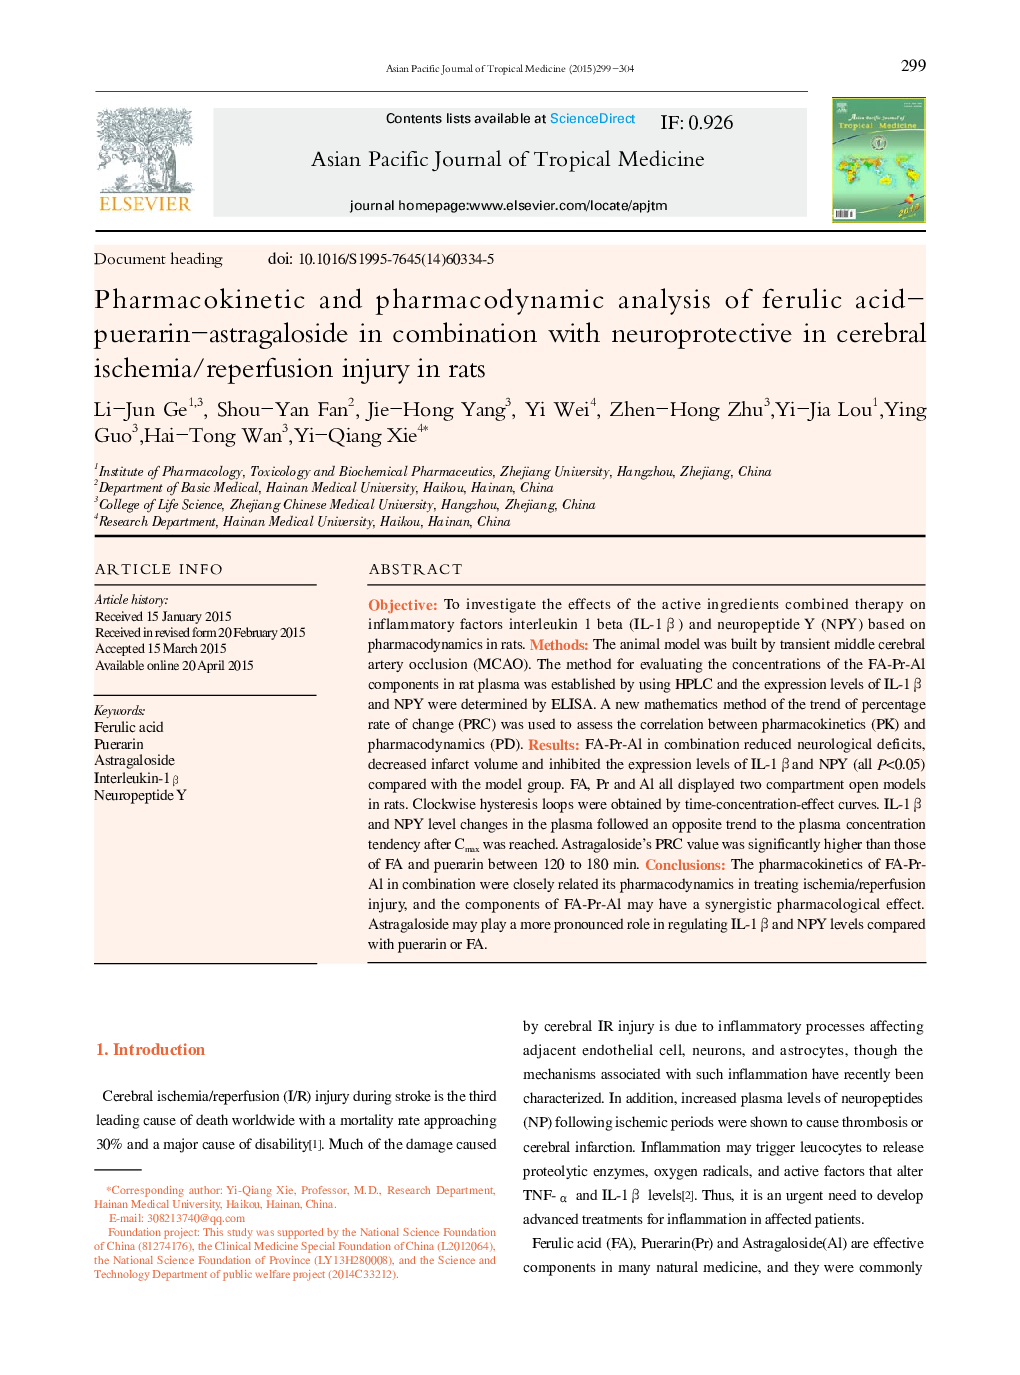 Pharmacokinetic and pharmacodynamic analysis of ferulic acid-puerarin-astragaloside in combination with neuroprotective in cerebral ischemia/reperfusion injury in rats 